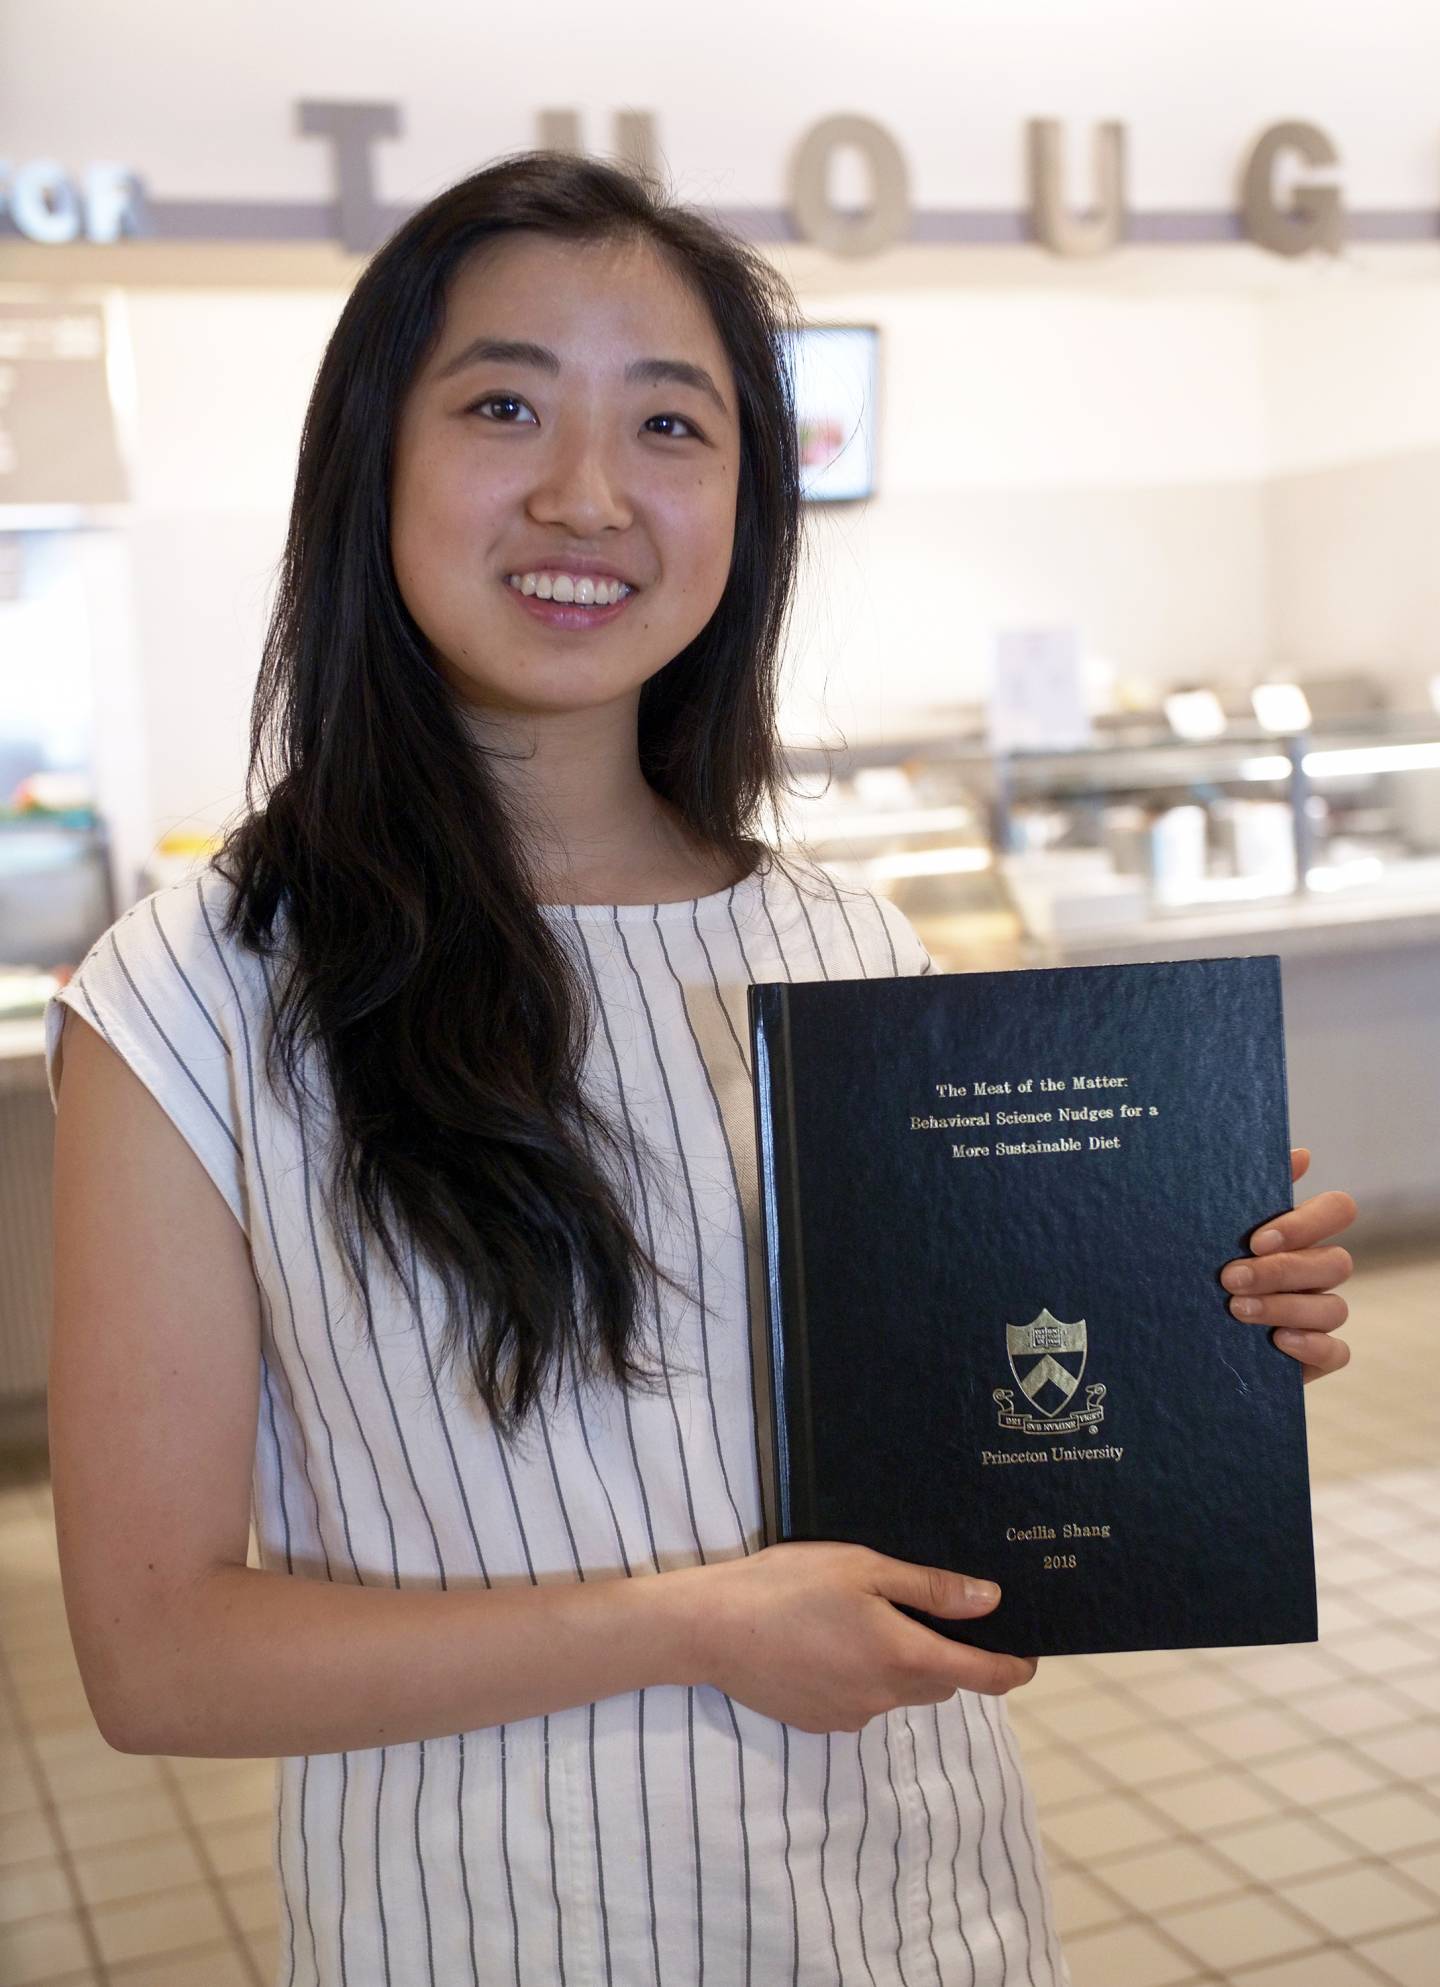 Cecilia Shang with her thesis